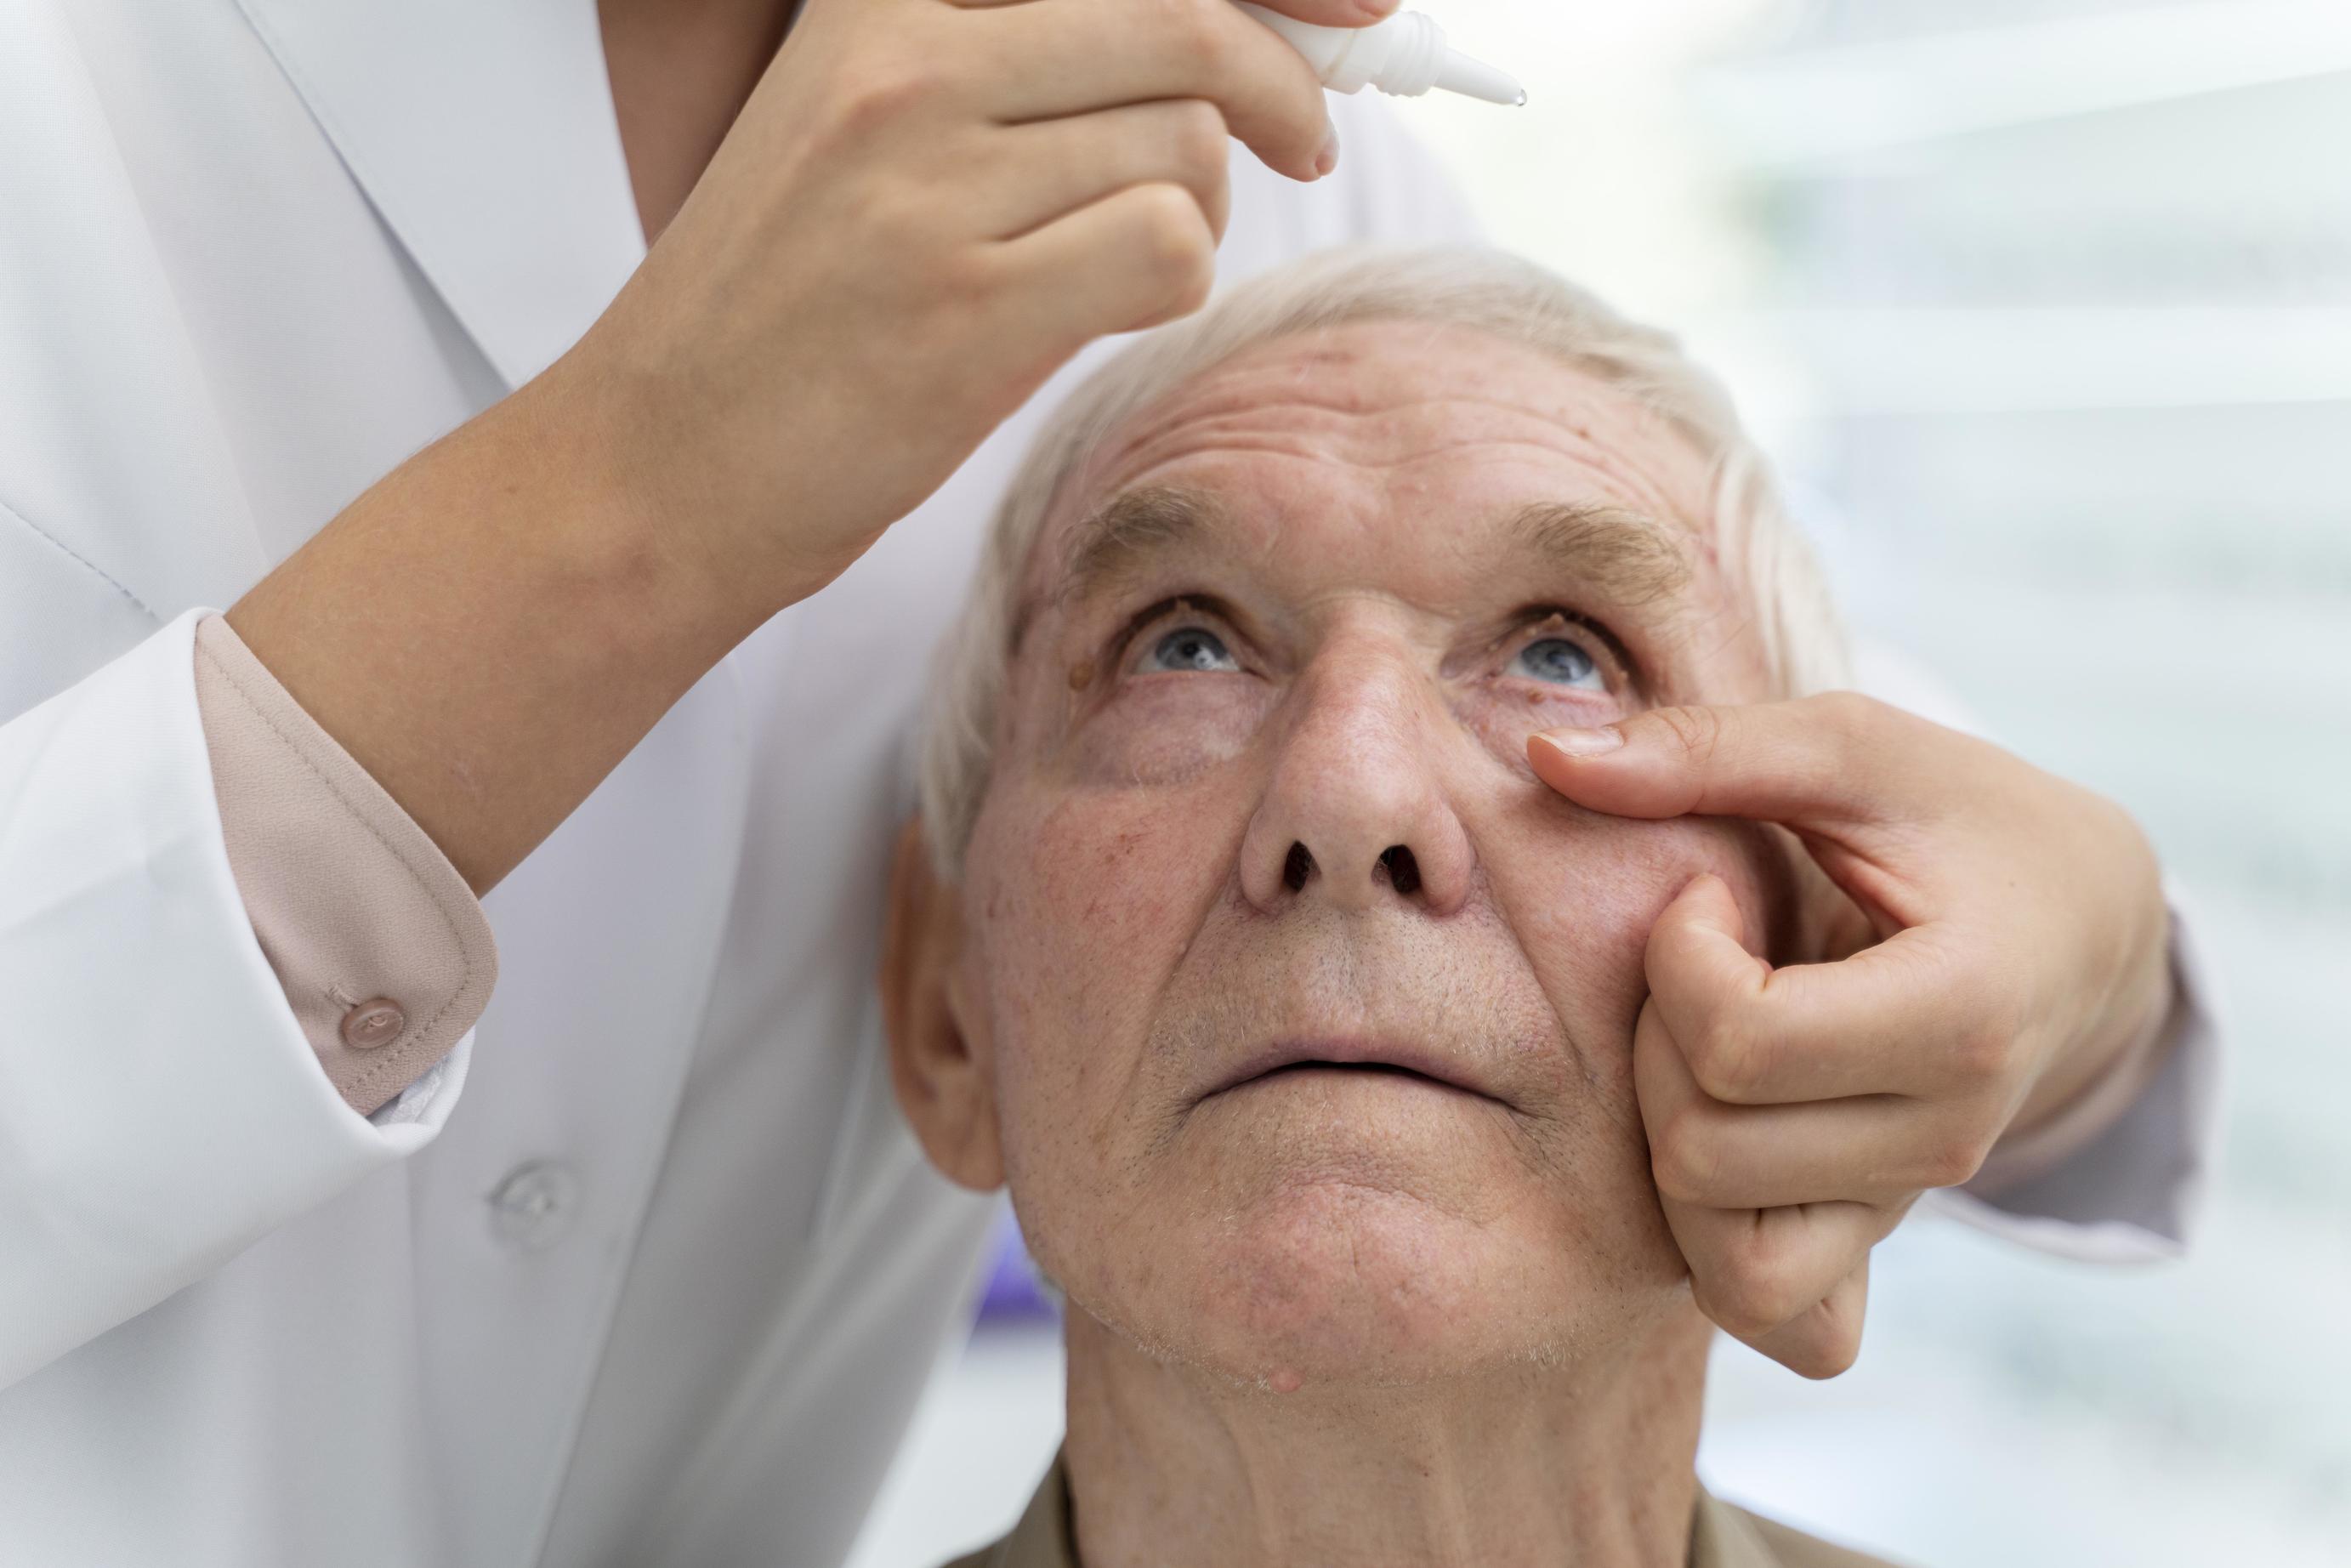 Eye Doctors Hospital - Things to know while using Eye Drops: - Always use  eye drops as directed by your ophthalmologist. - Don't use Eye Drops on a  daily basis unless prescribed. 